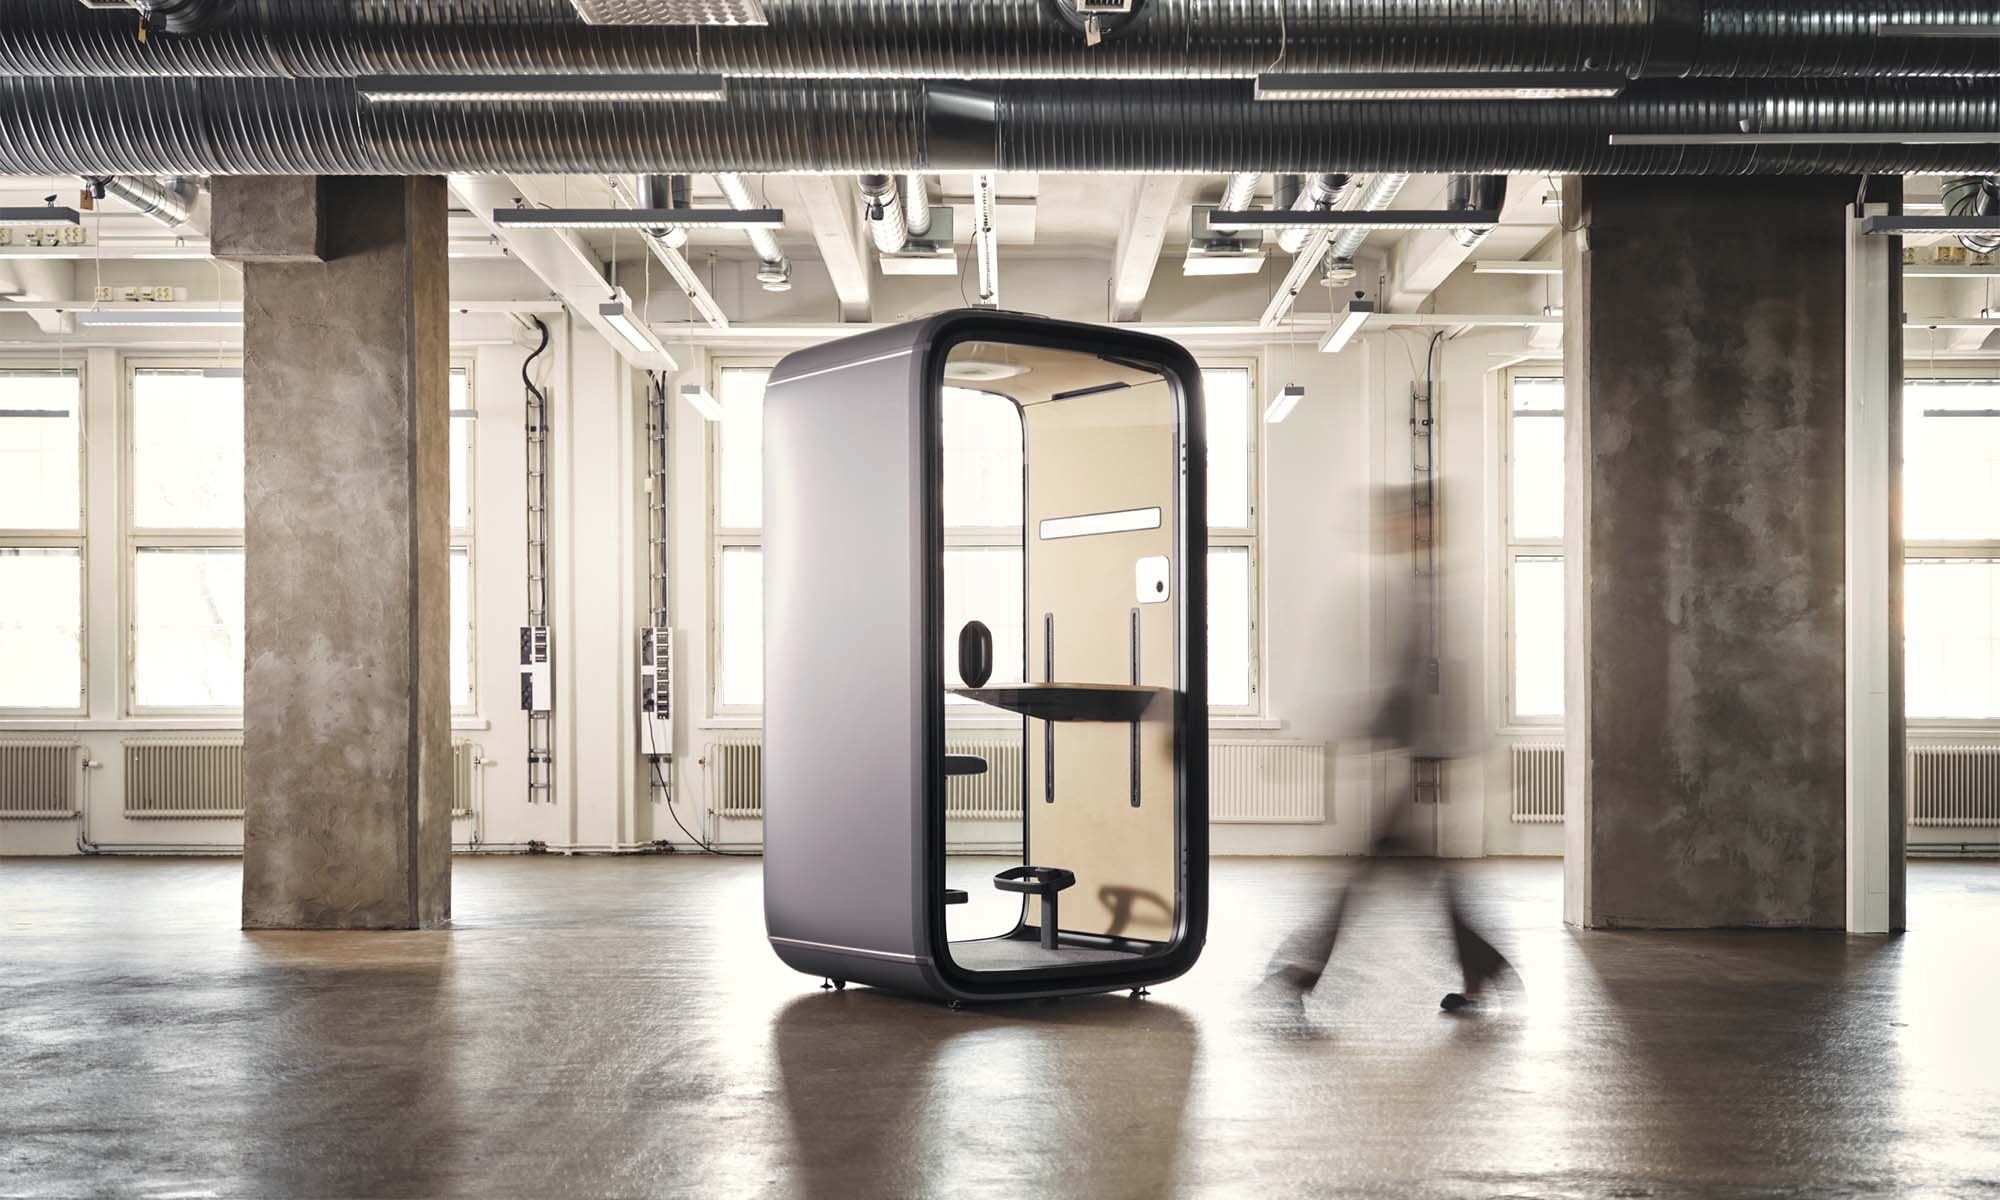 Framery One office pod in an open space with a person walking towards it.